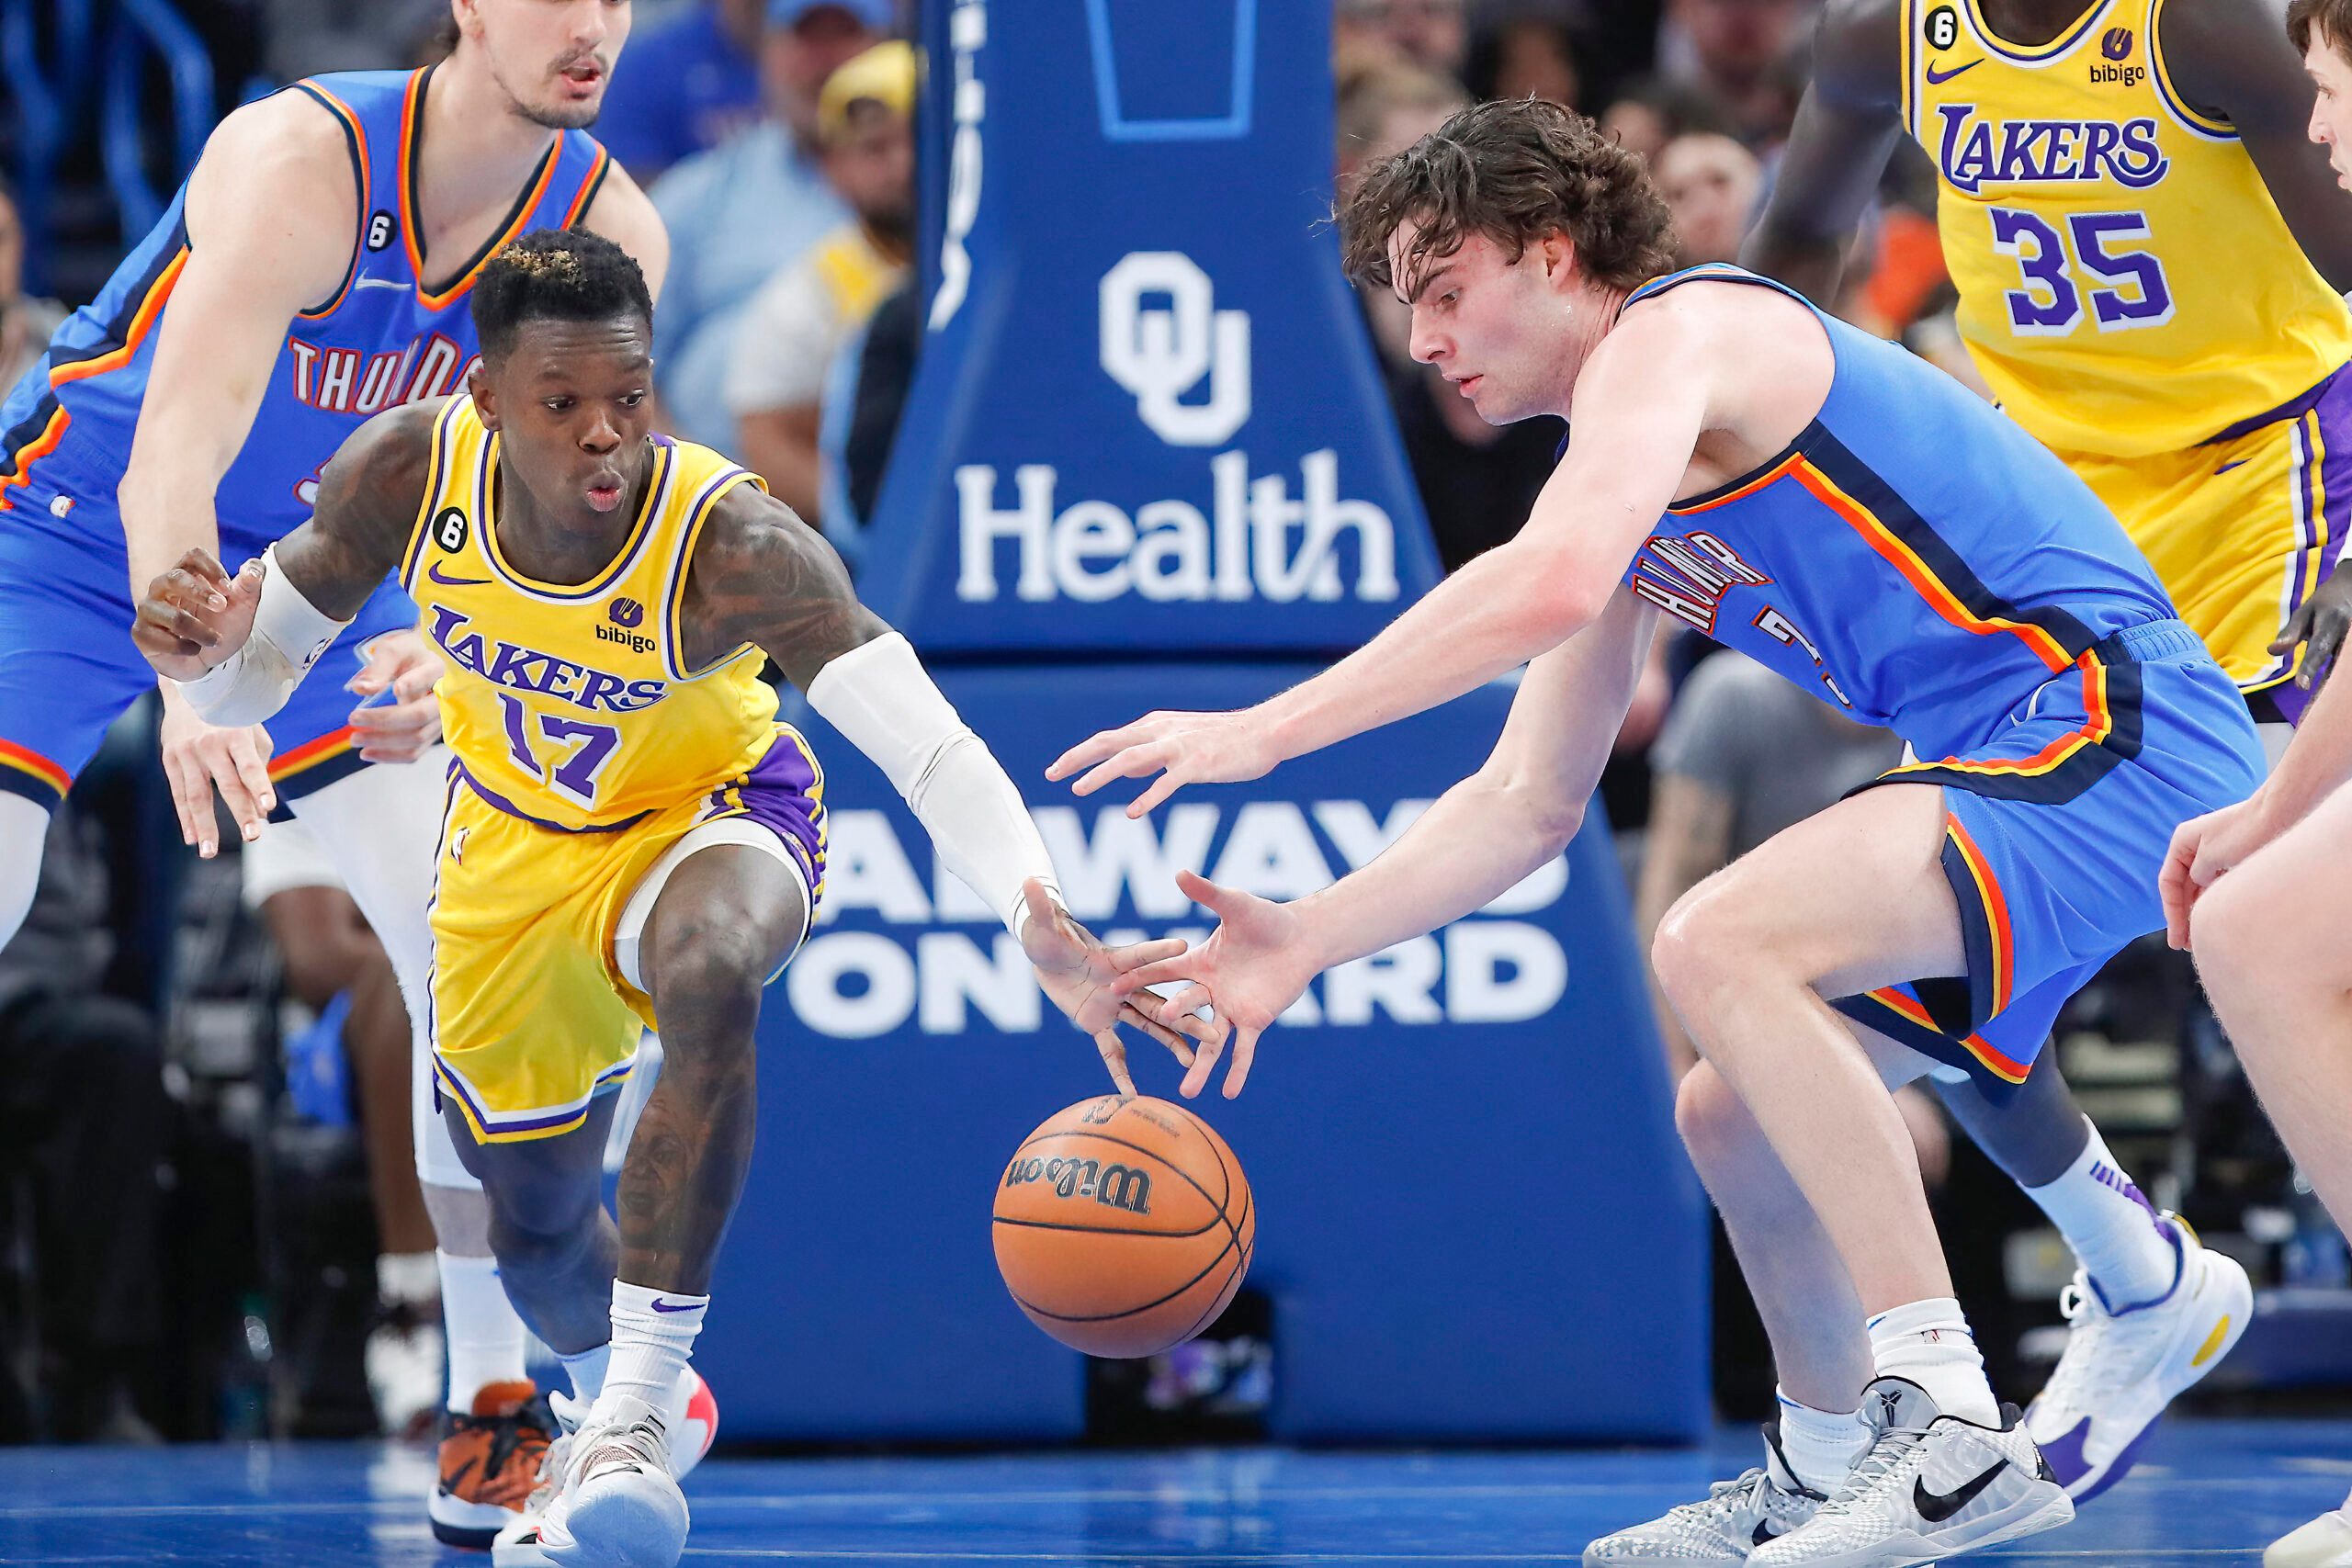 Missing 2 superstars, Lakers get past Thunder